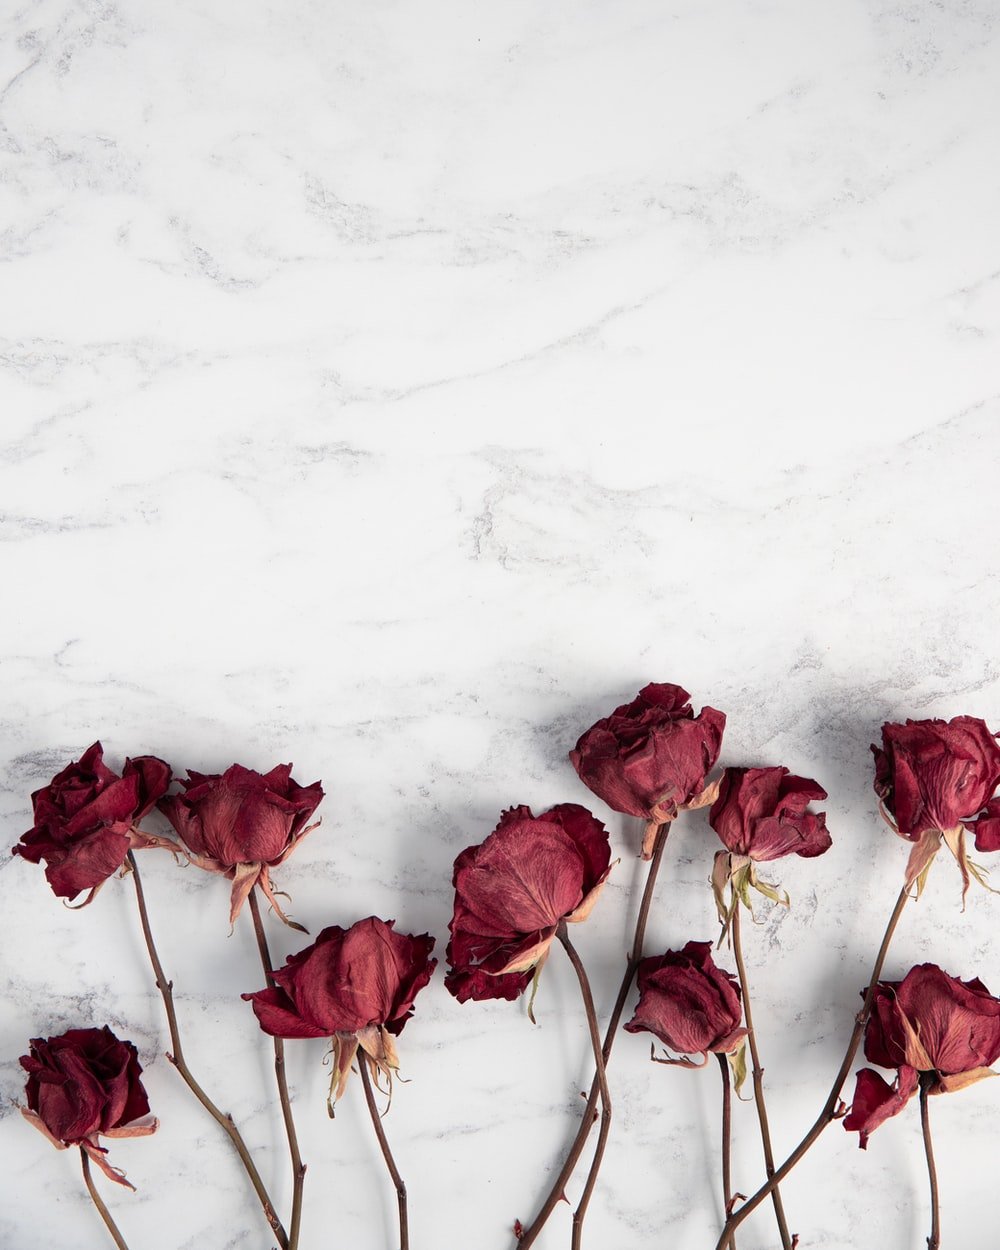 Dried Rose Picture. Download Free Image